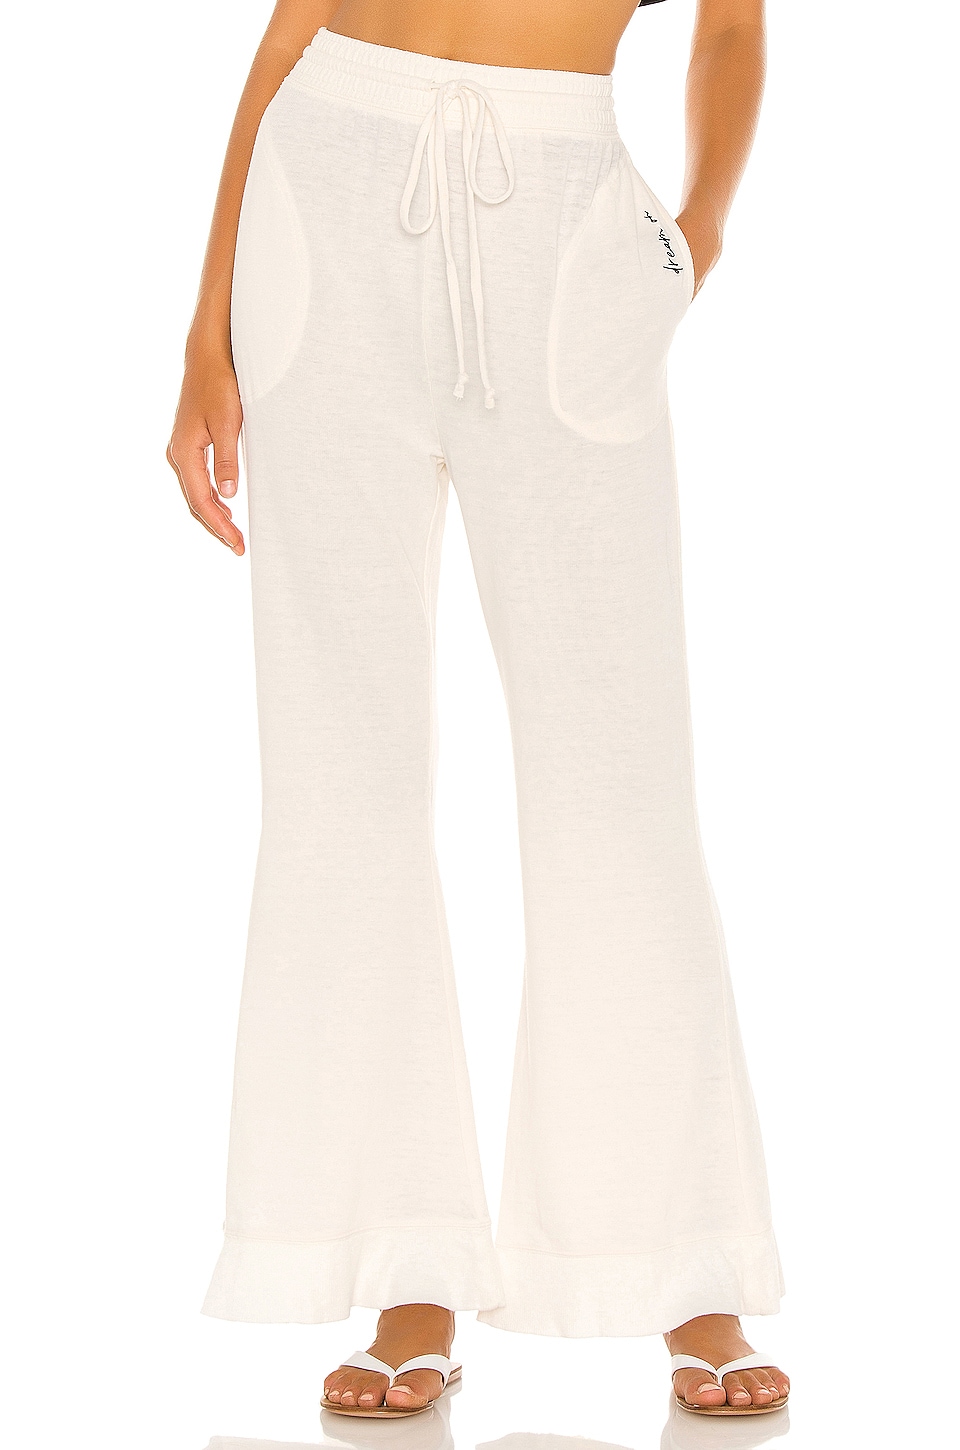 Free People Cozy Cool Lounge Pant in Ivory | REVOLVE